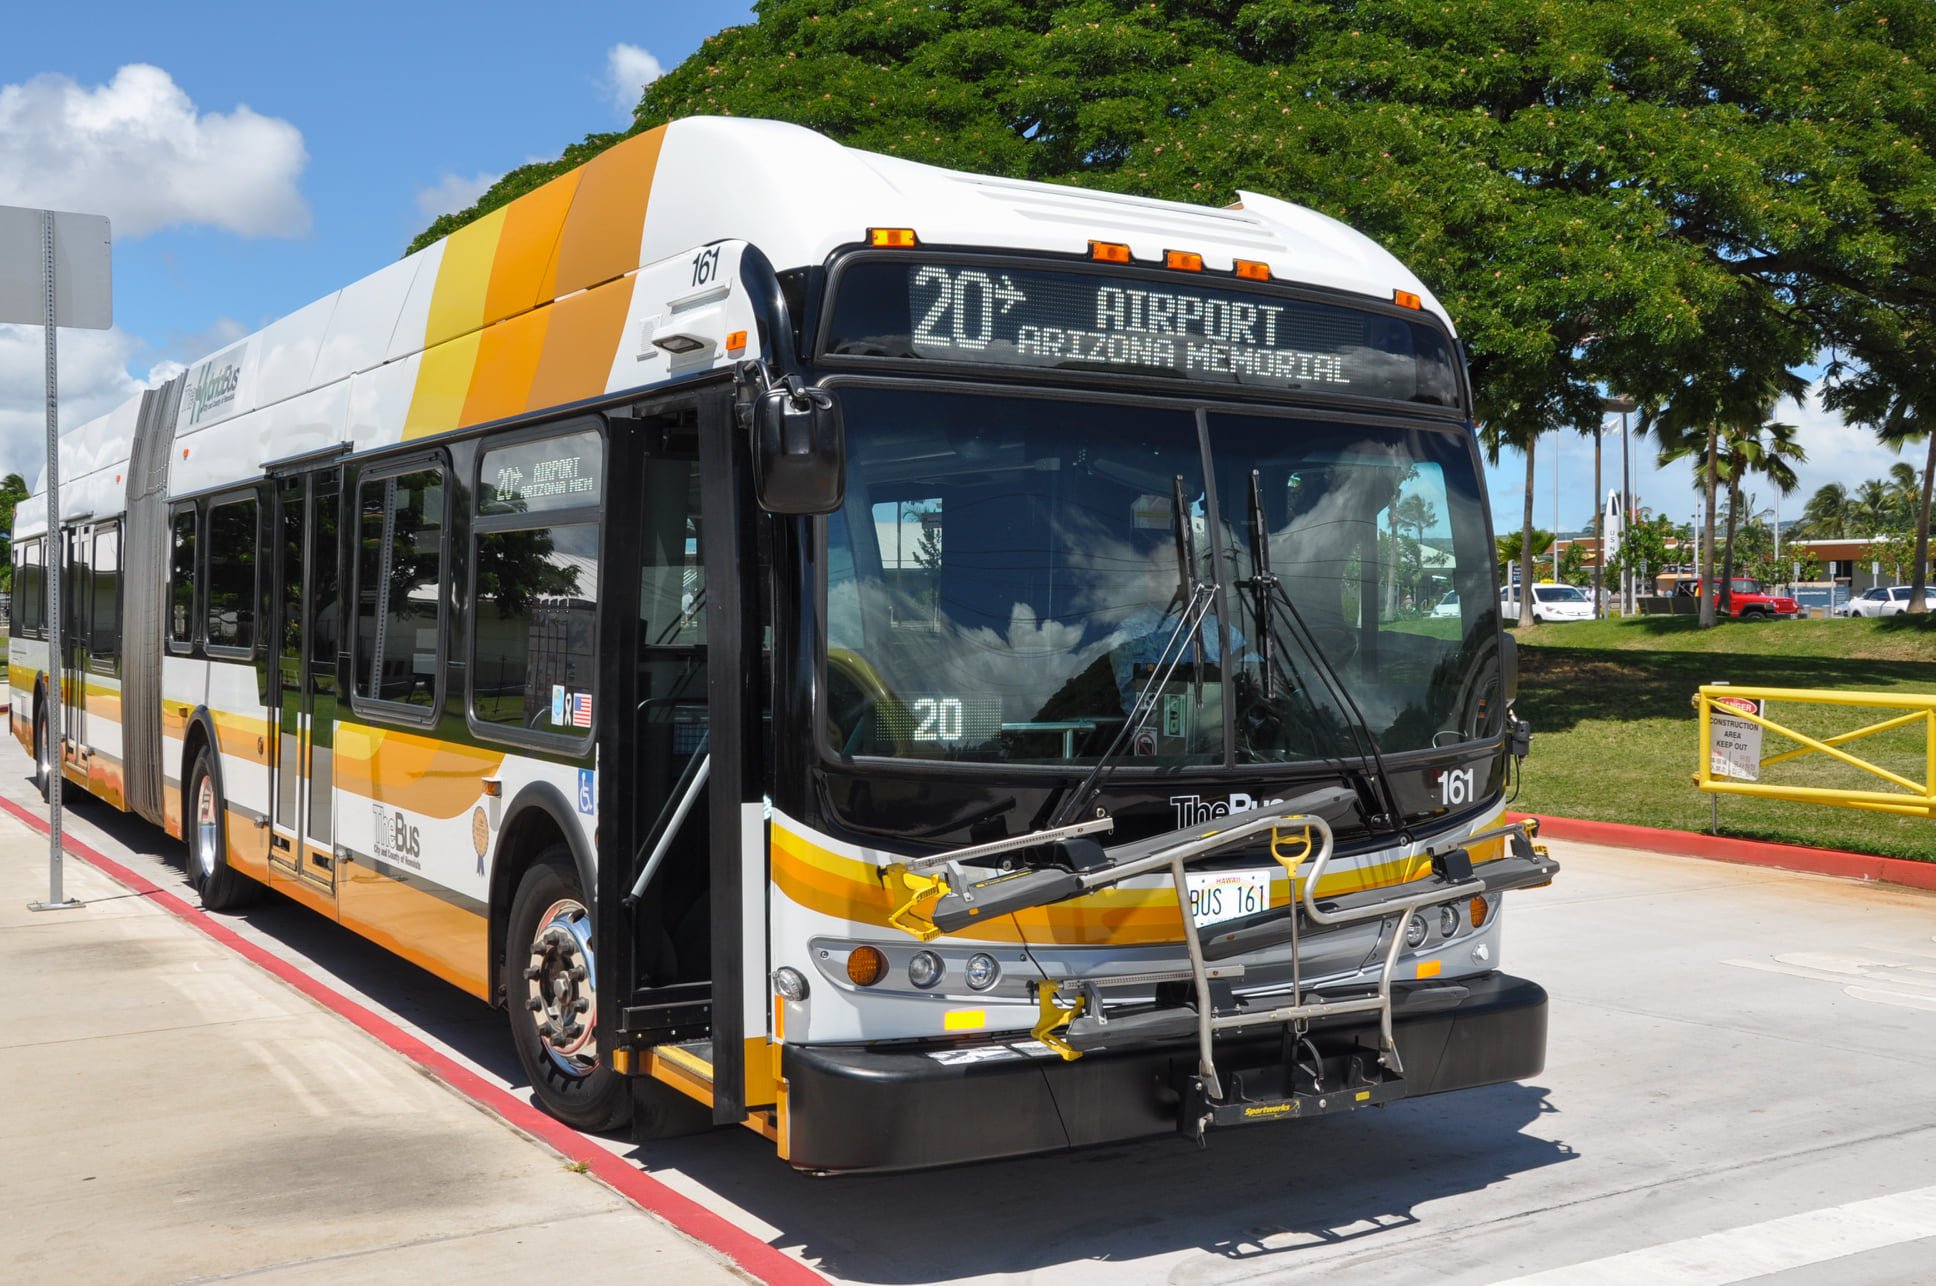 How To Get From Honolulu Airport To Kailua - All Possible Ways, cheapest way from Honolulu airport to Kailua, Honolulu airport to Kailua, Honolulu Airport Bus To Kailua, Honolulu to Kailua